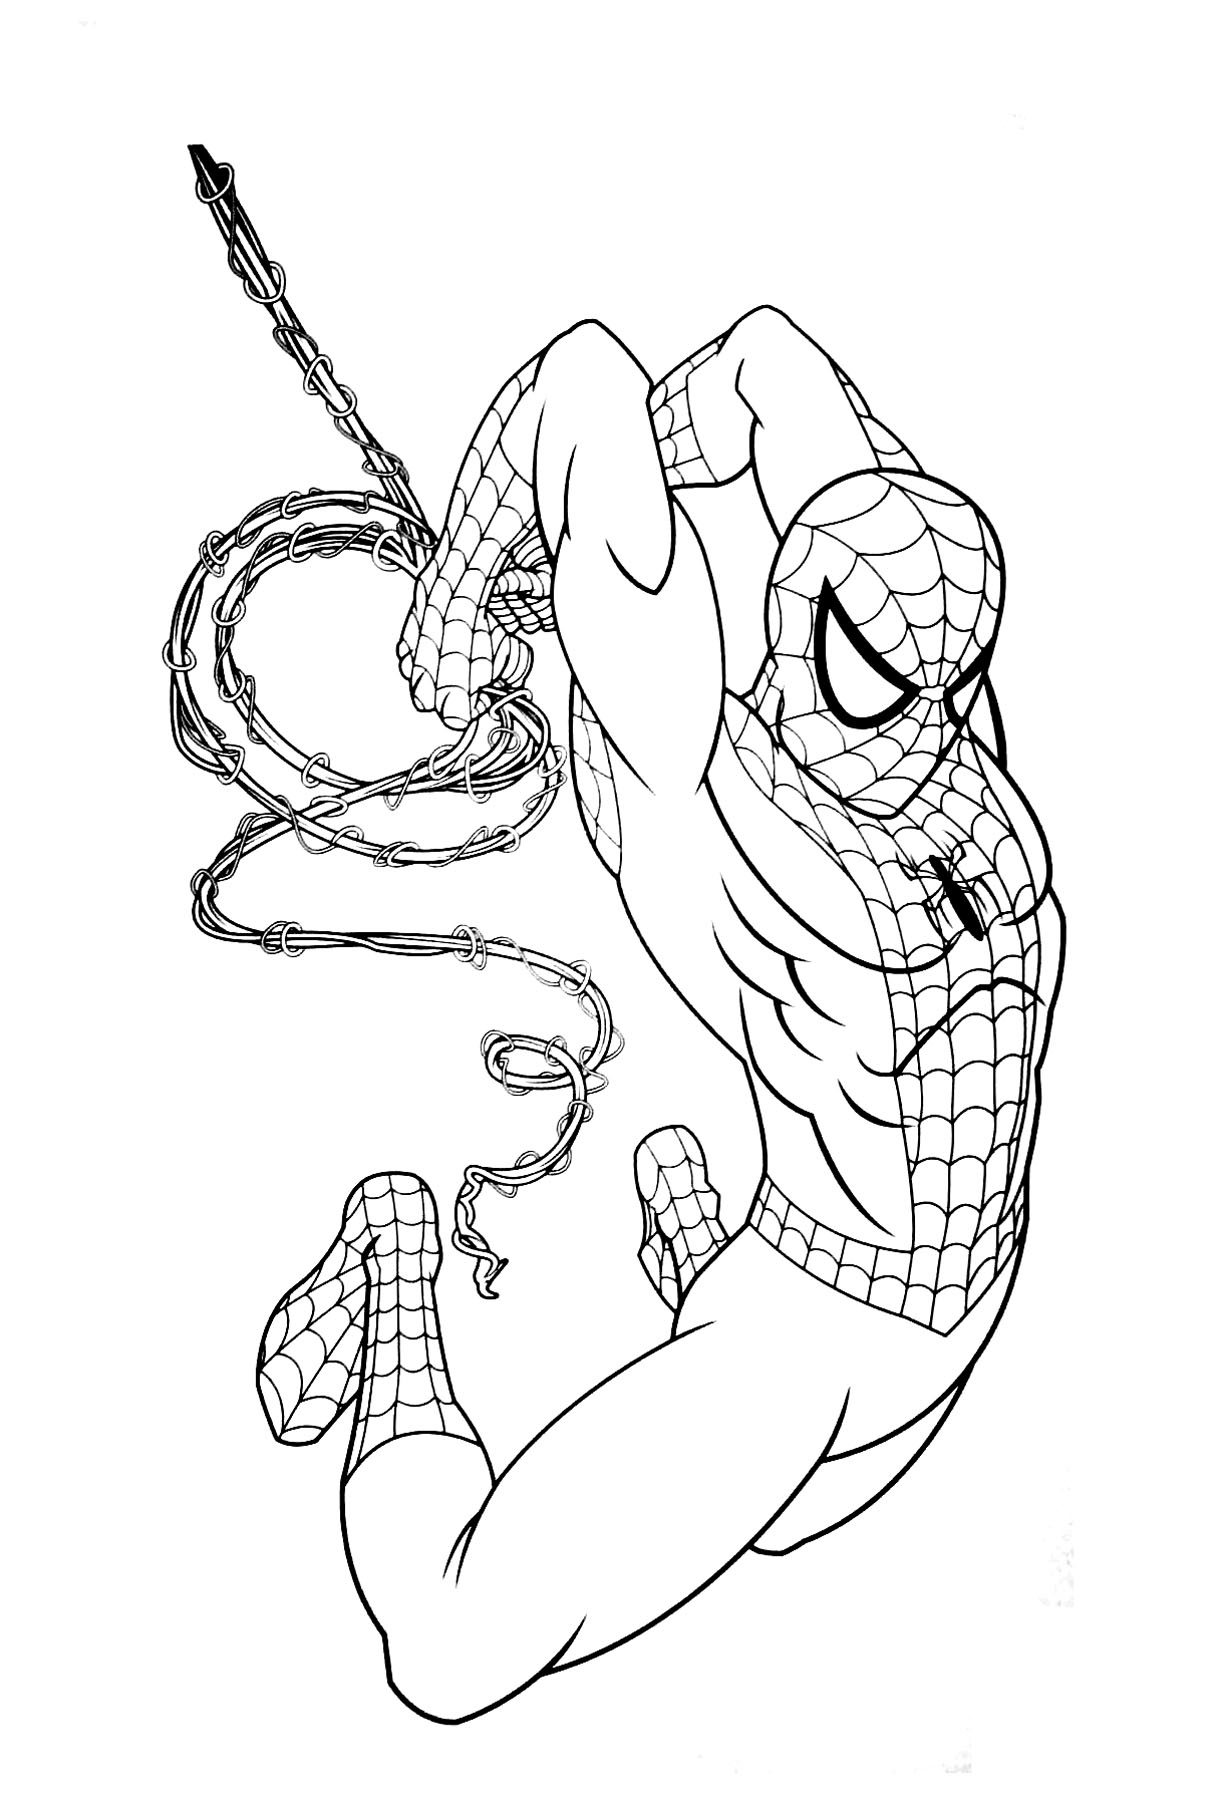 Download Spiderman free to color for children - Spiderman Kids Coloring Pages